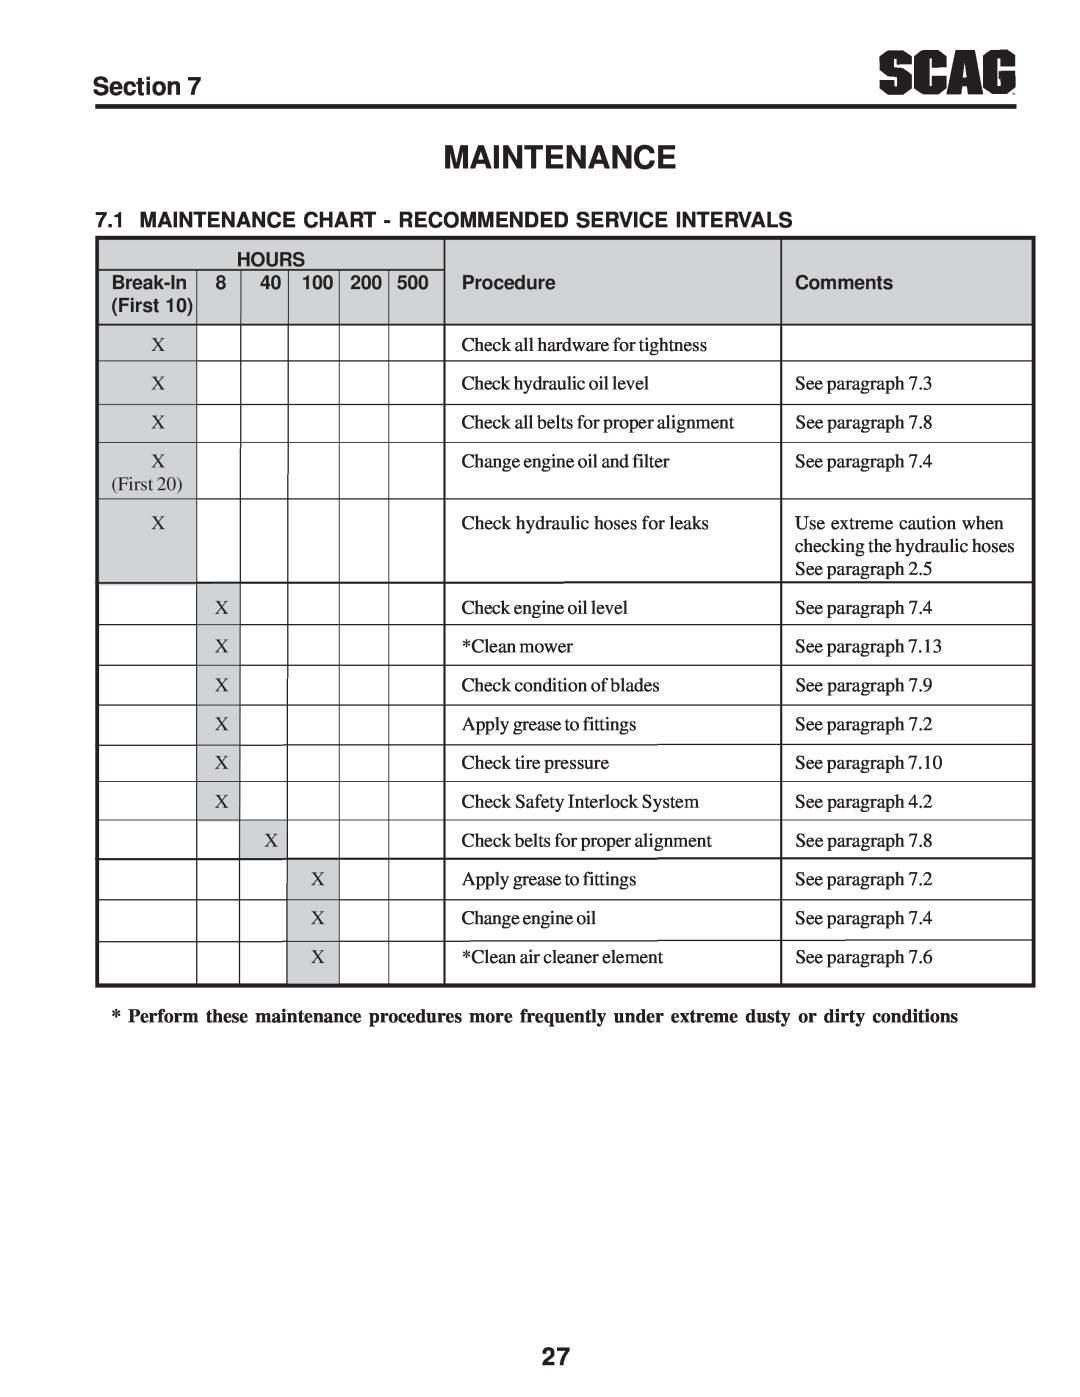 Scag Power Equipment SWZV manual Maintenance Chart - Recommended Service Intervals 